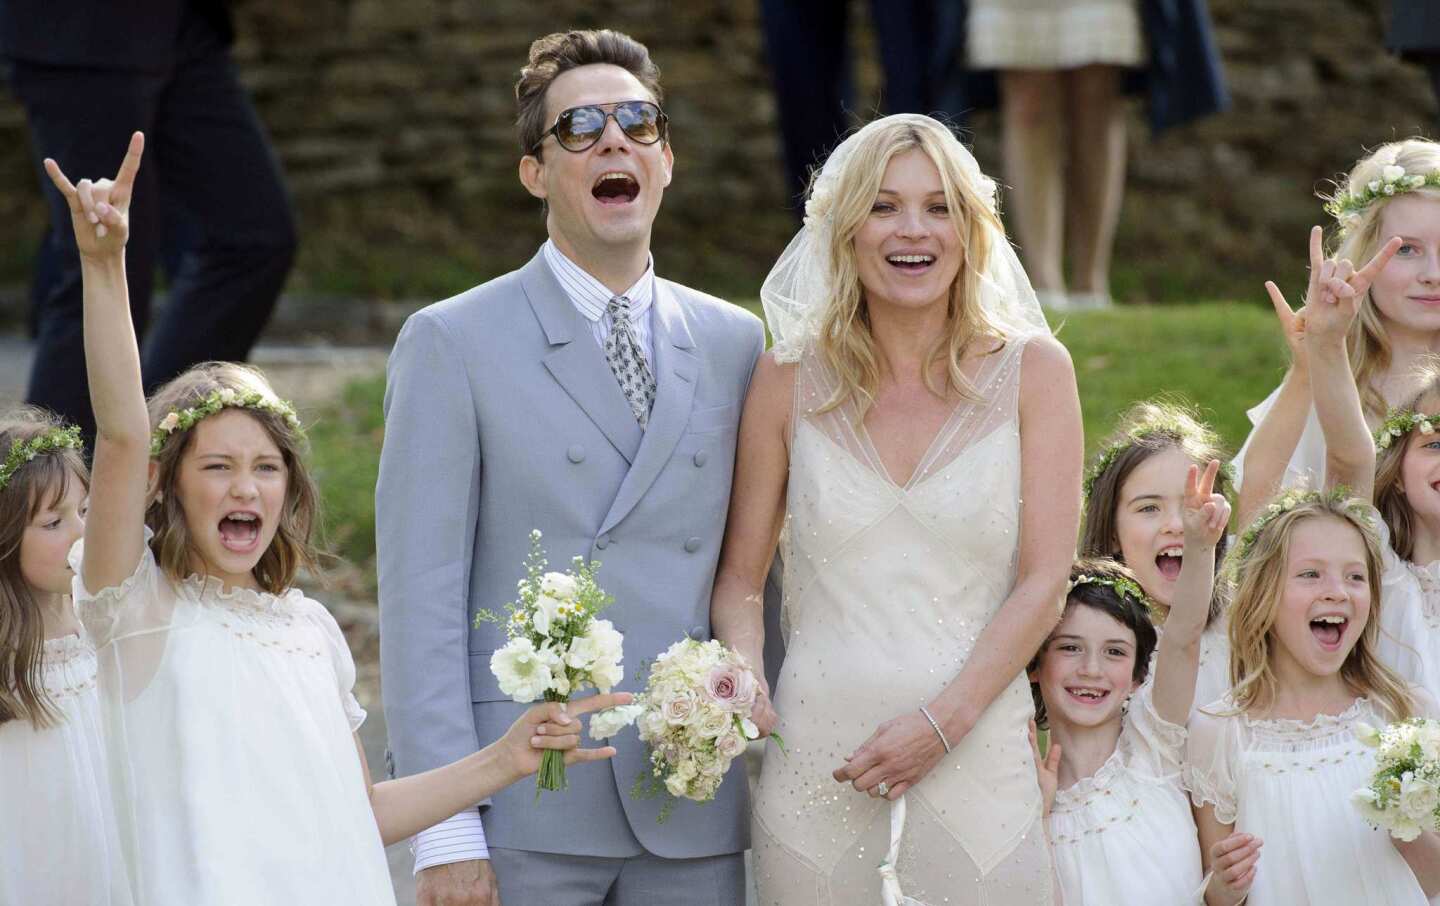 Fashionable weddings: model Kate Moss got married (with exclusive coverage in Vogue, of course).